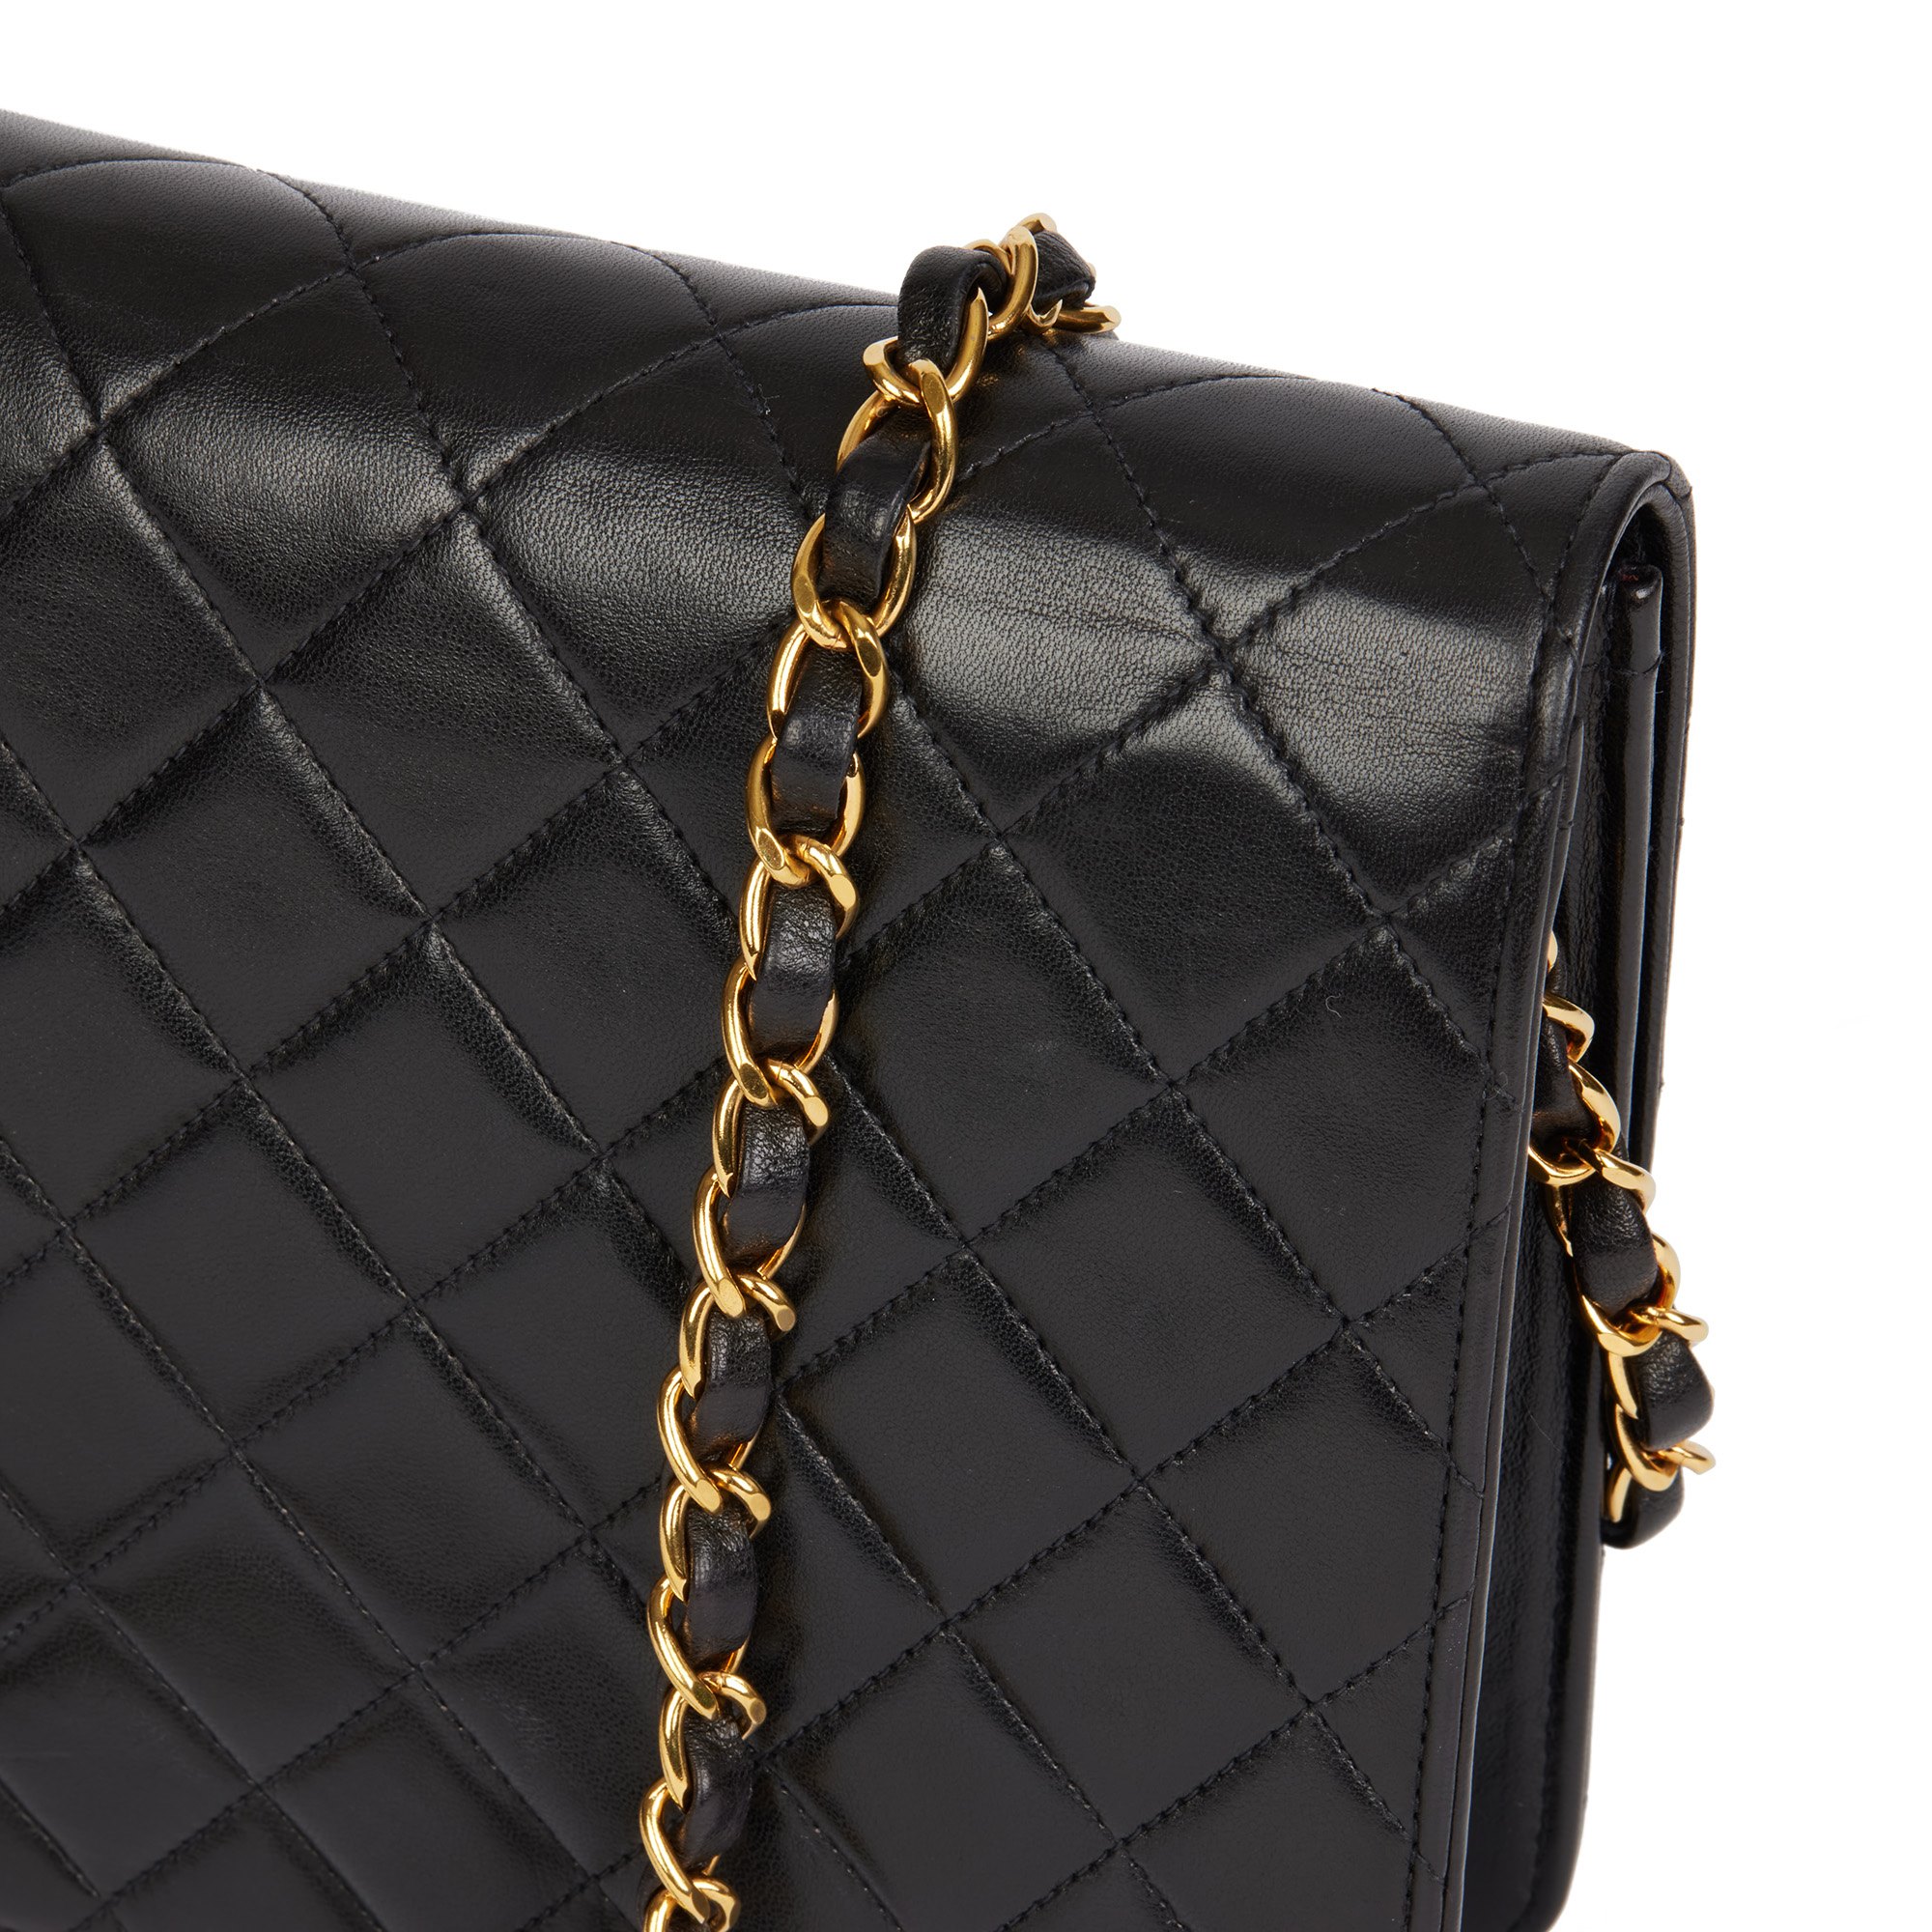 Chanel Black Quilted Lambskin Vintage Small Classic Single Flap Bag